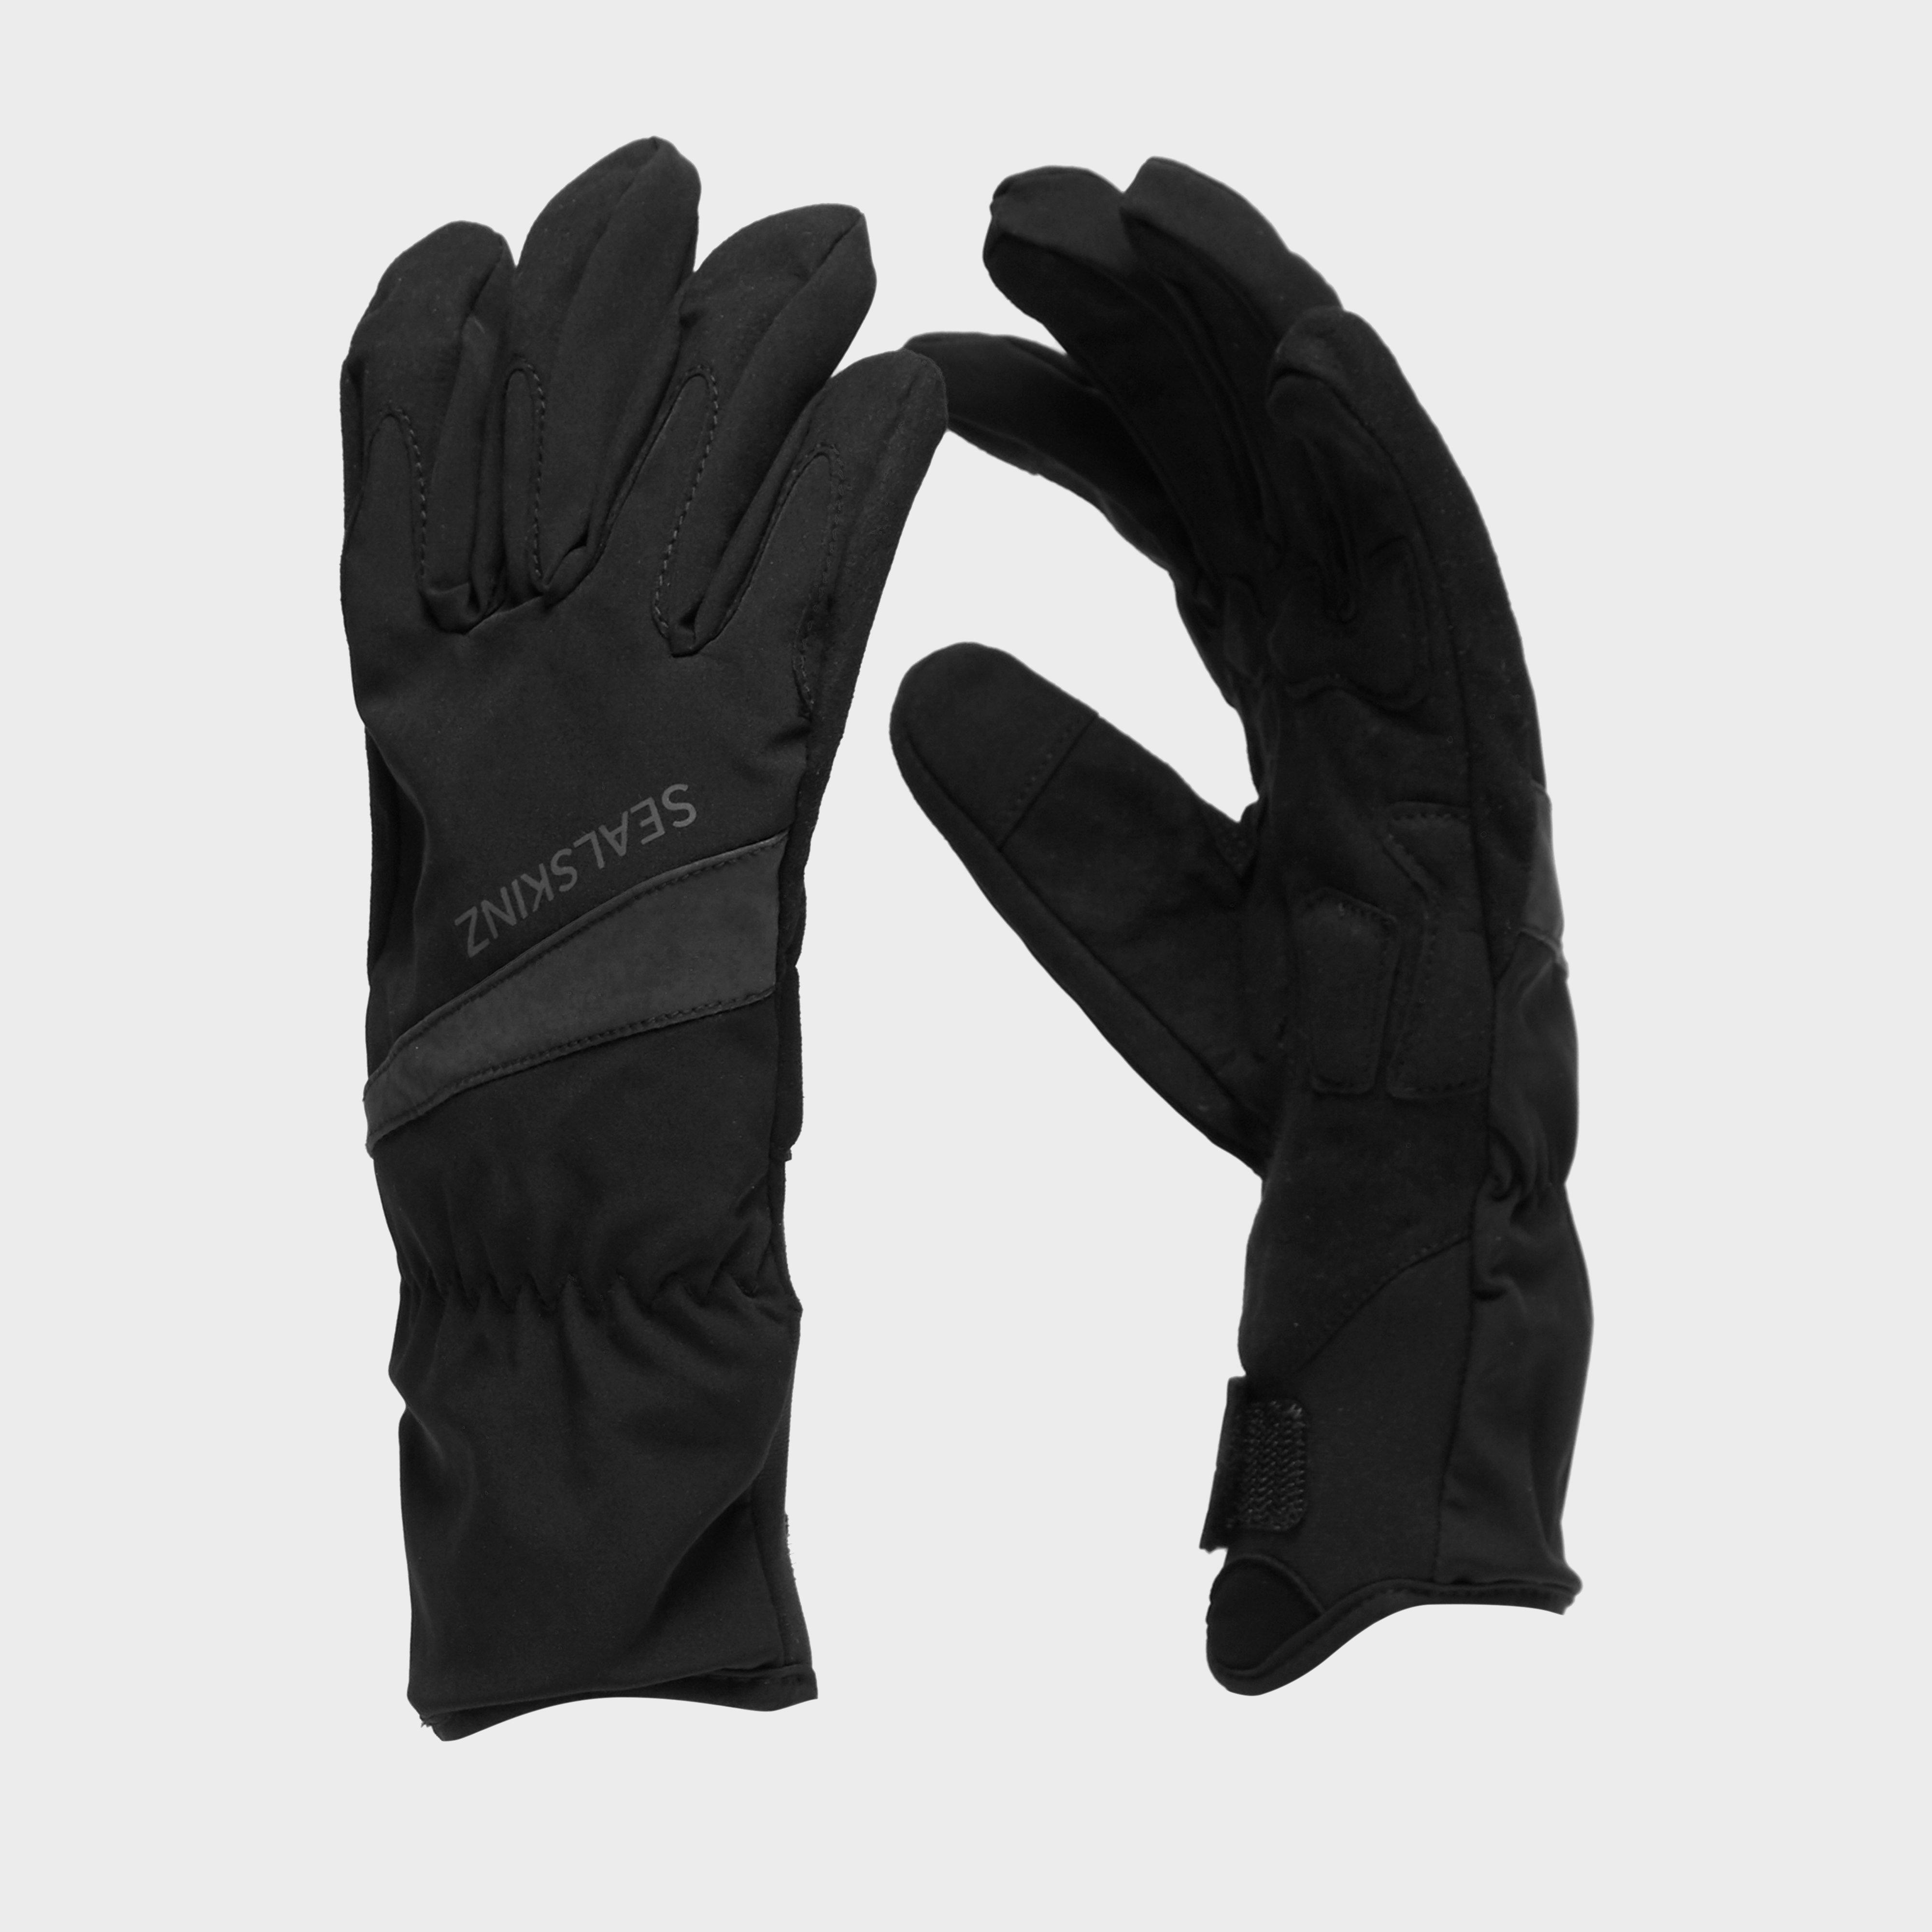  Sealskinz All Weather Cycle Gloves, Black